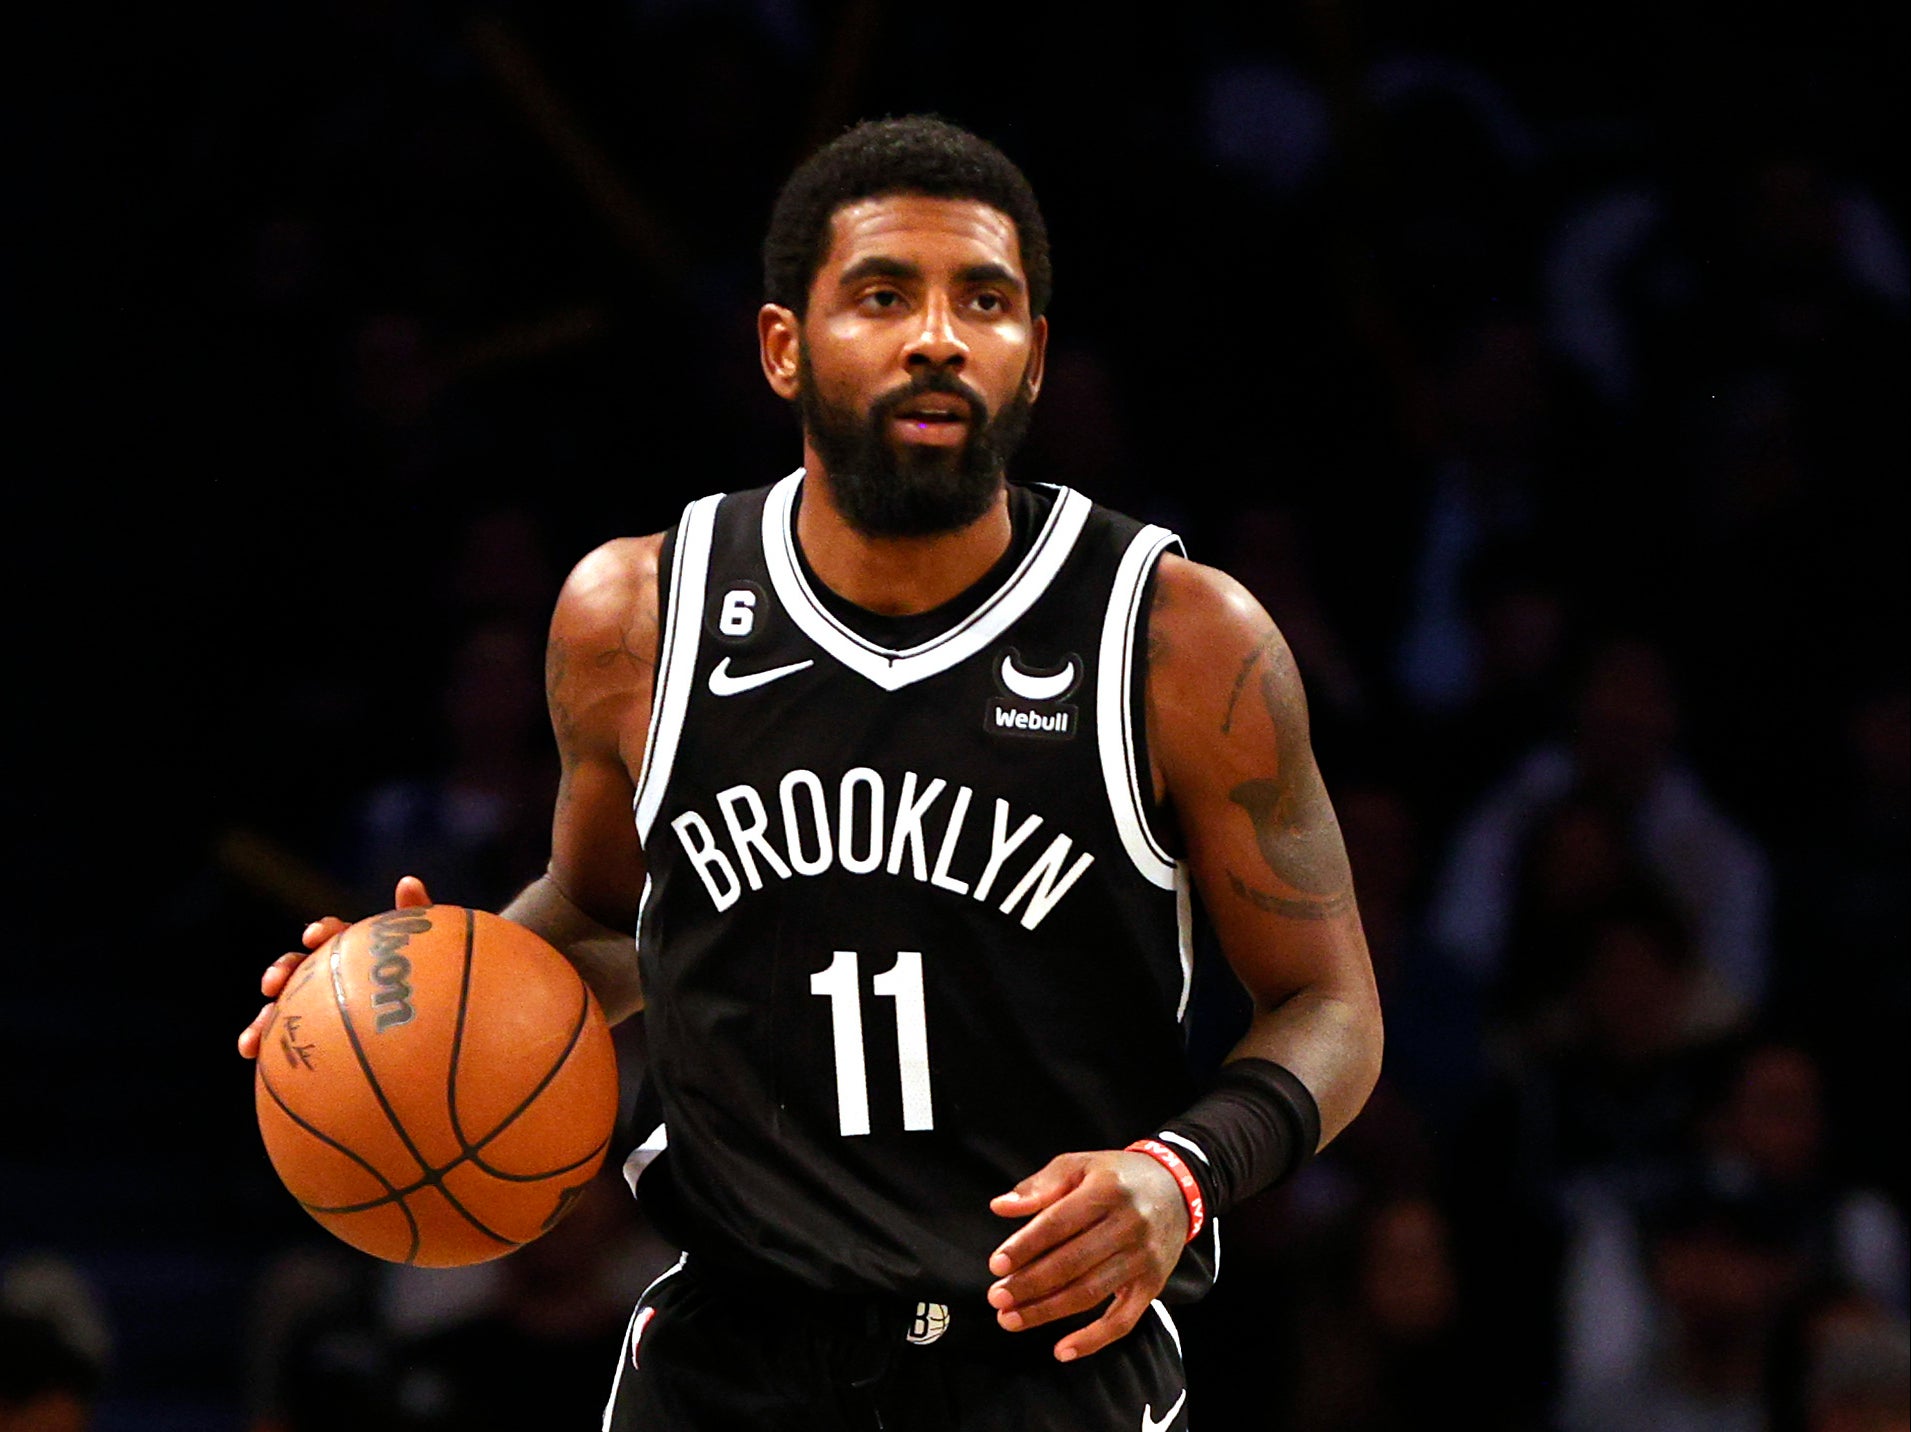 How will Kyrie Irving's anti-vax stance impact the Brooklyn Nets